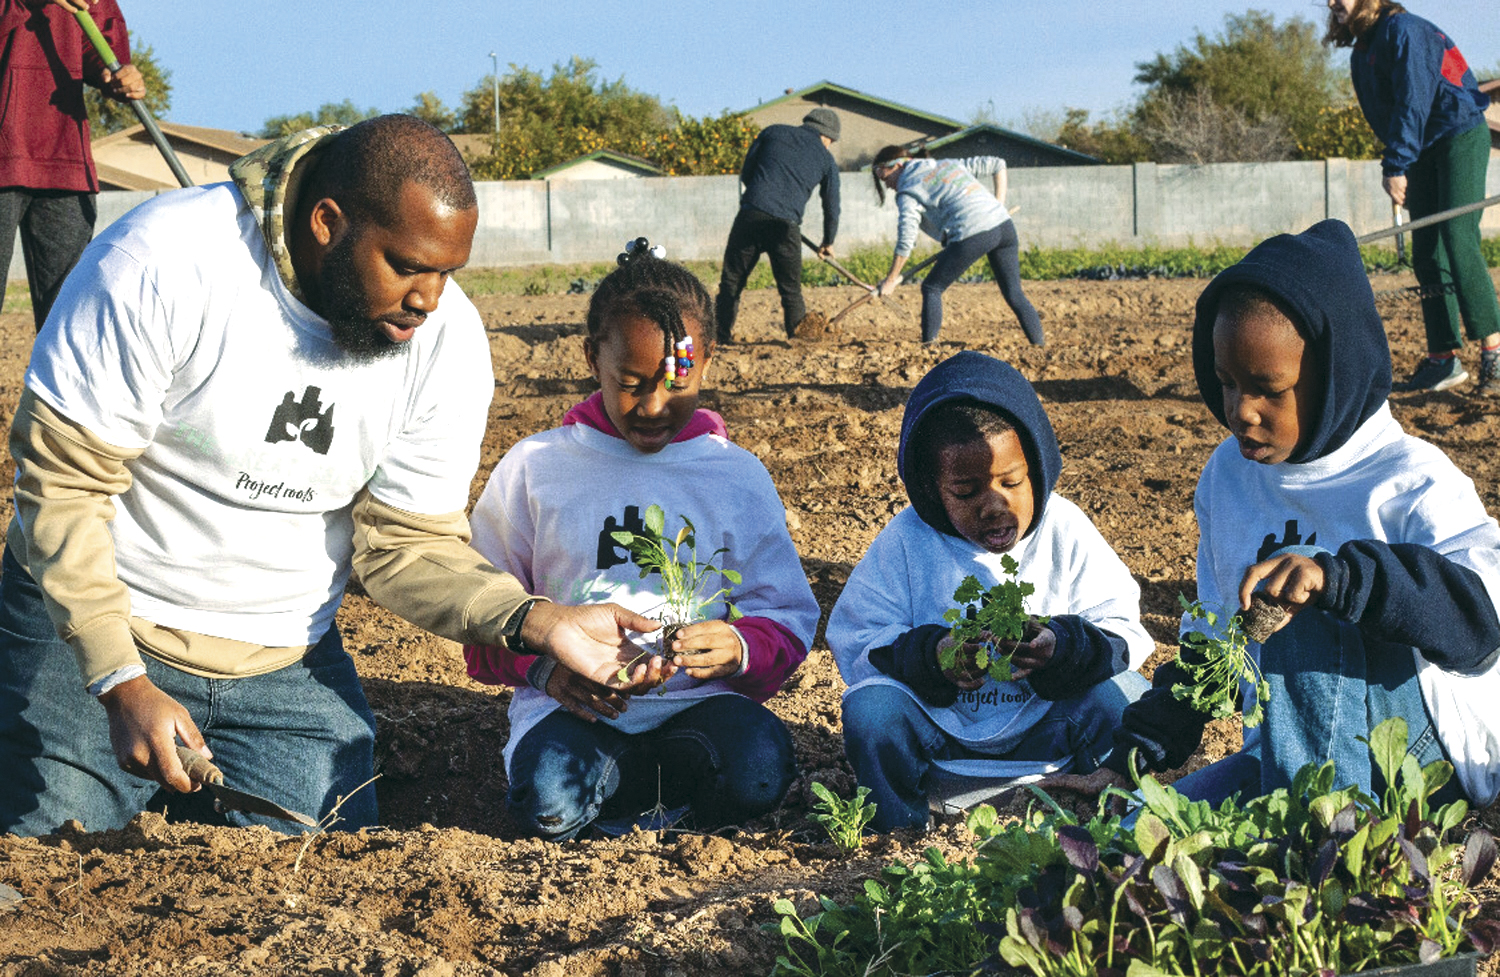 Growing gardens to help those in need